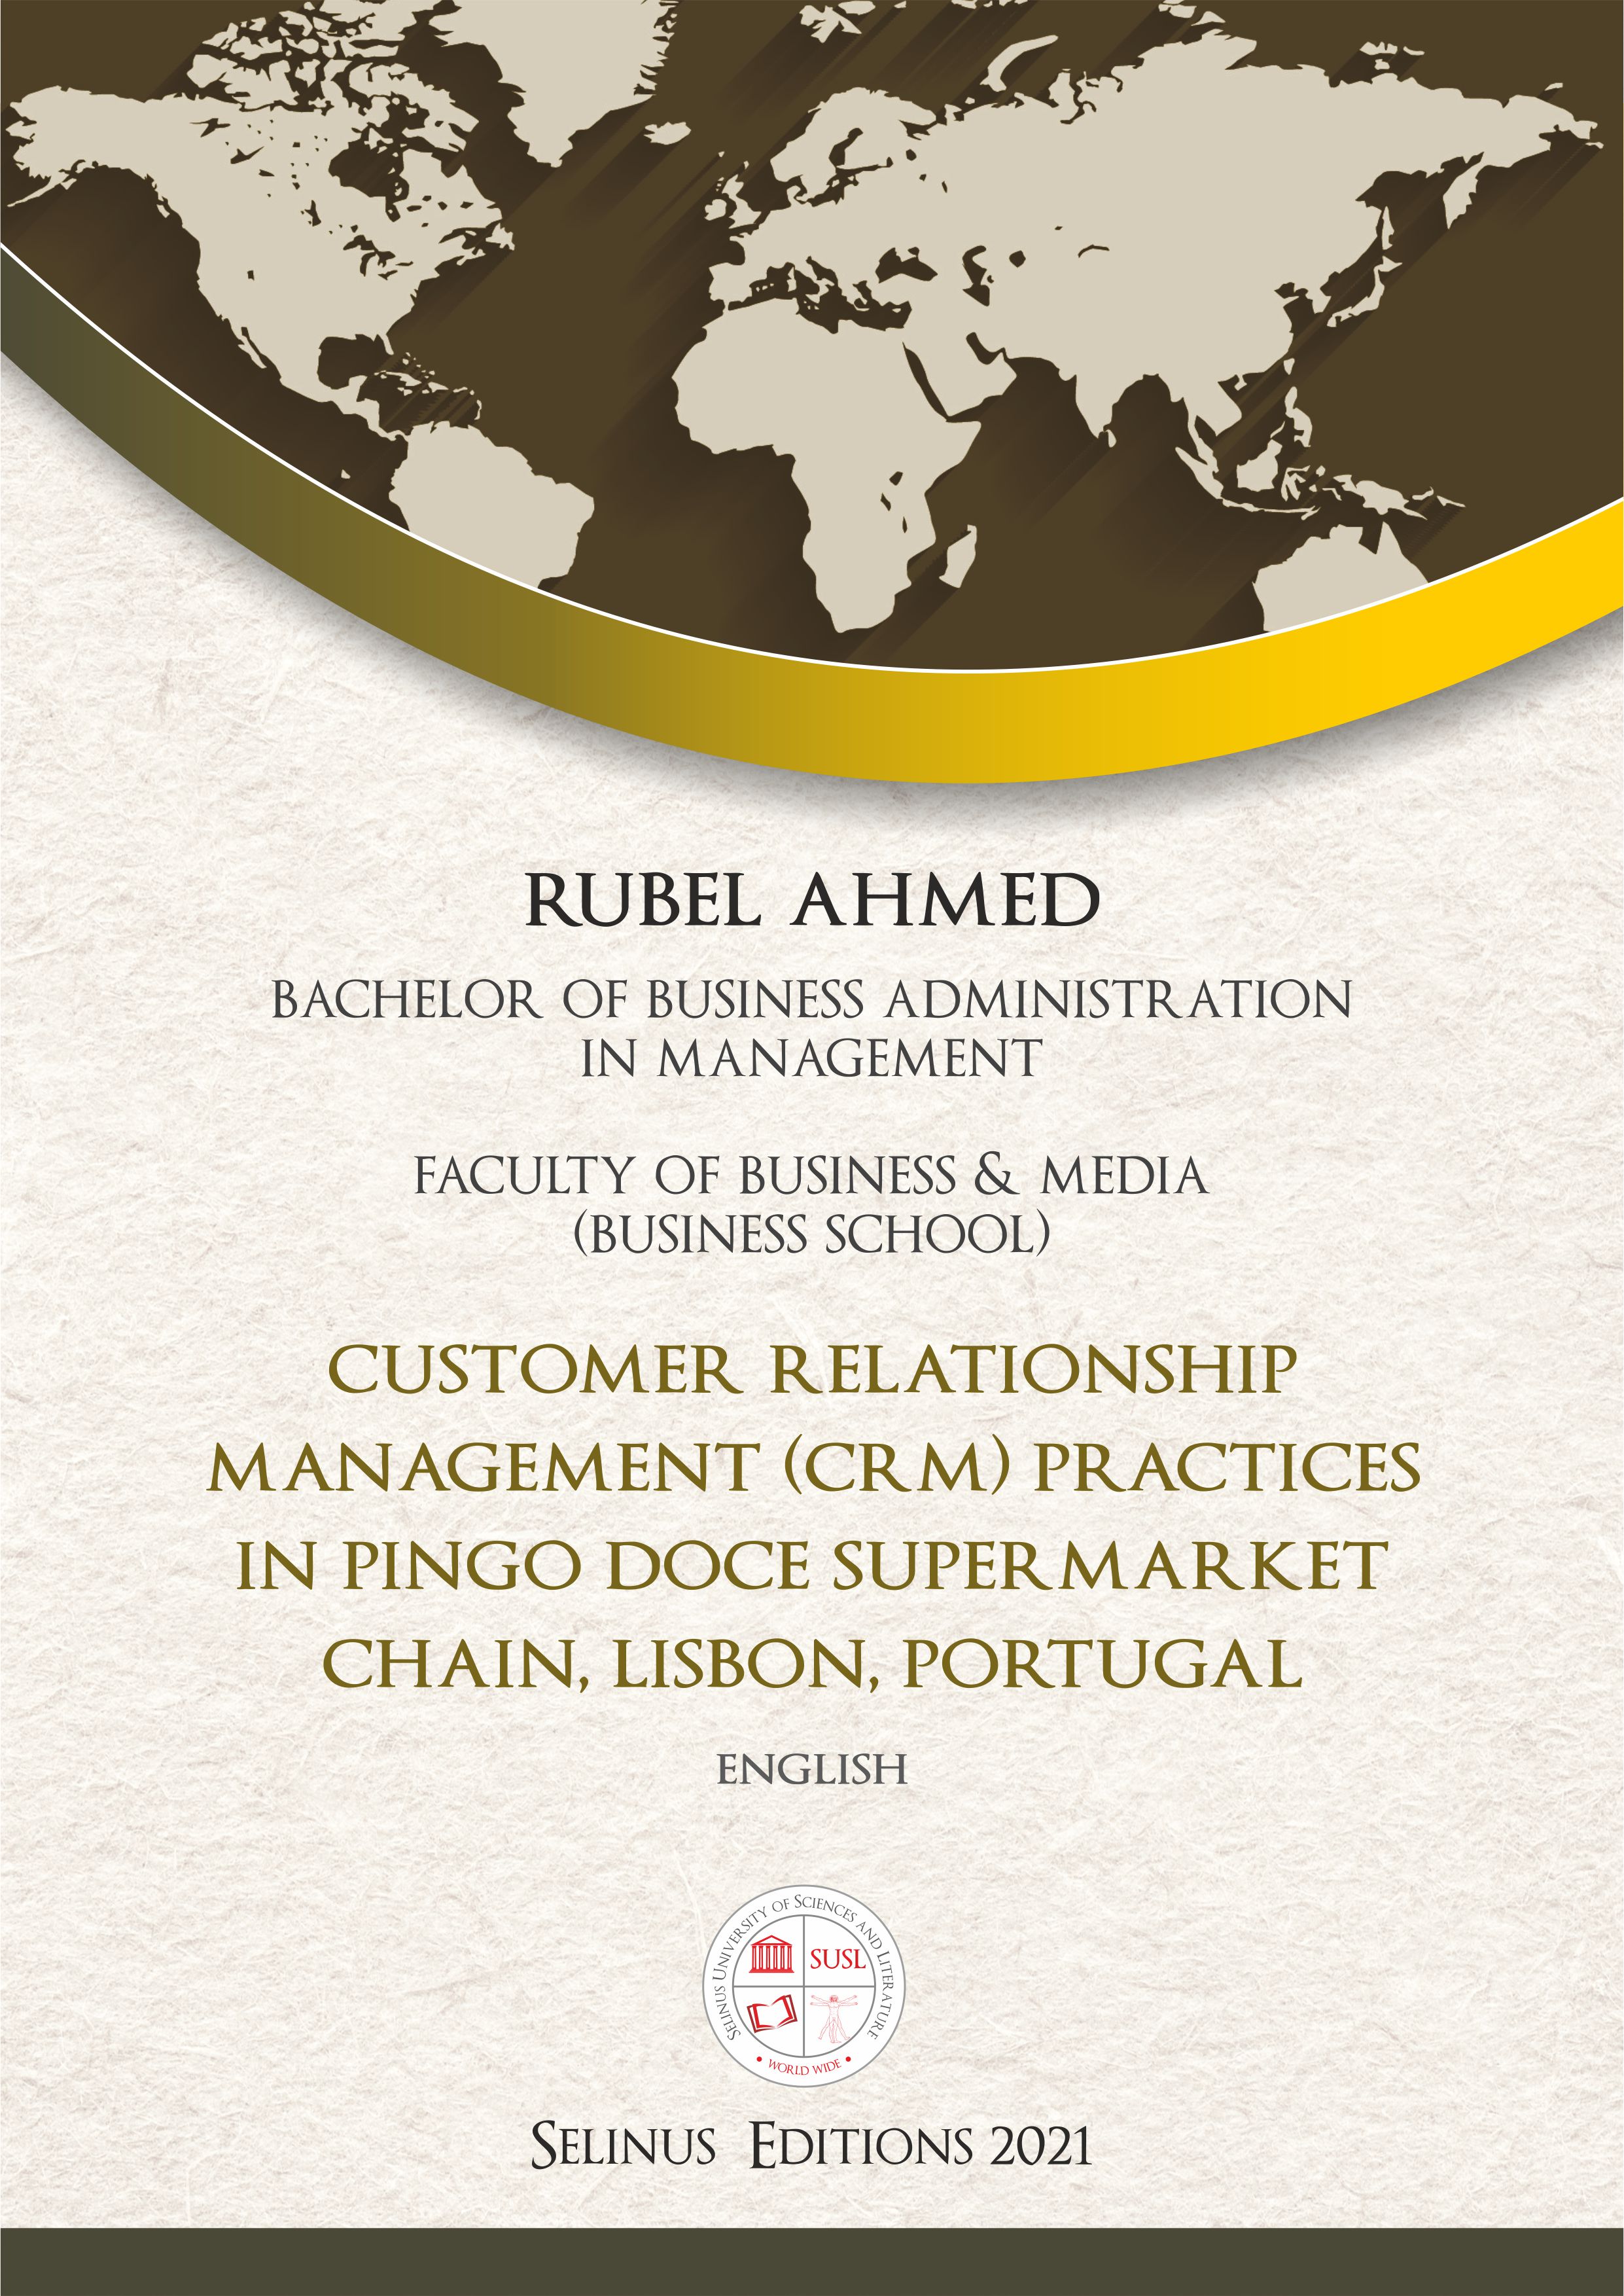 Thesis Rubel Ahmed